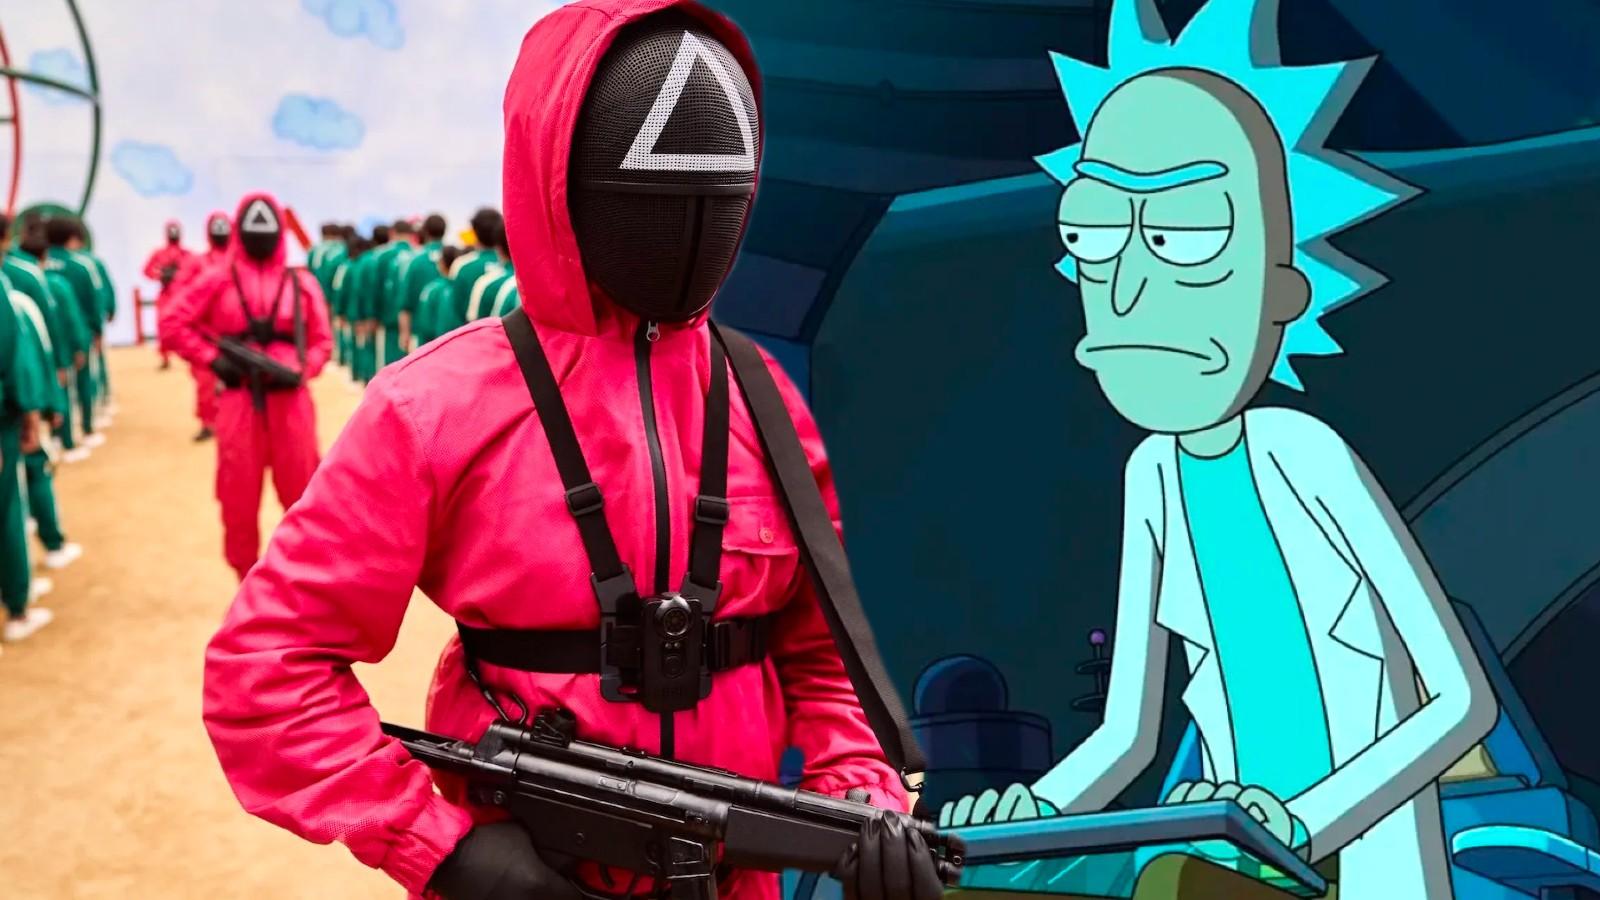 Stills from Squid Game and Rick and Morty